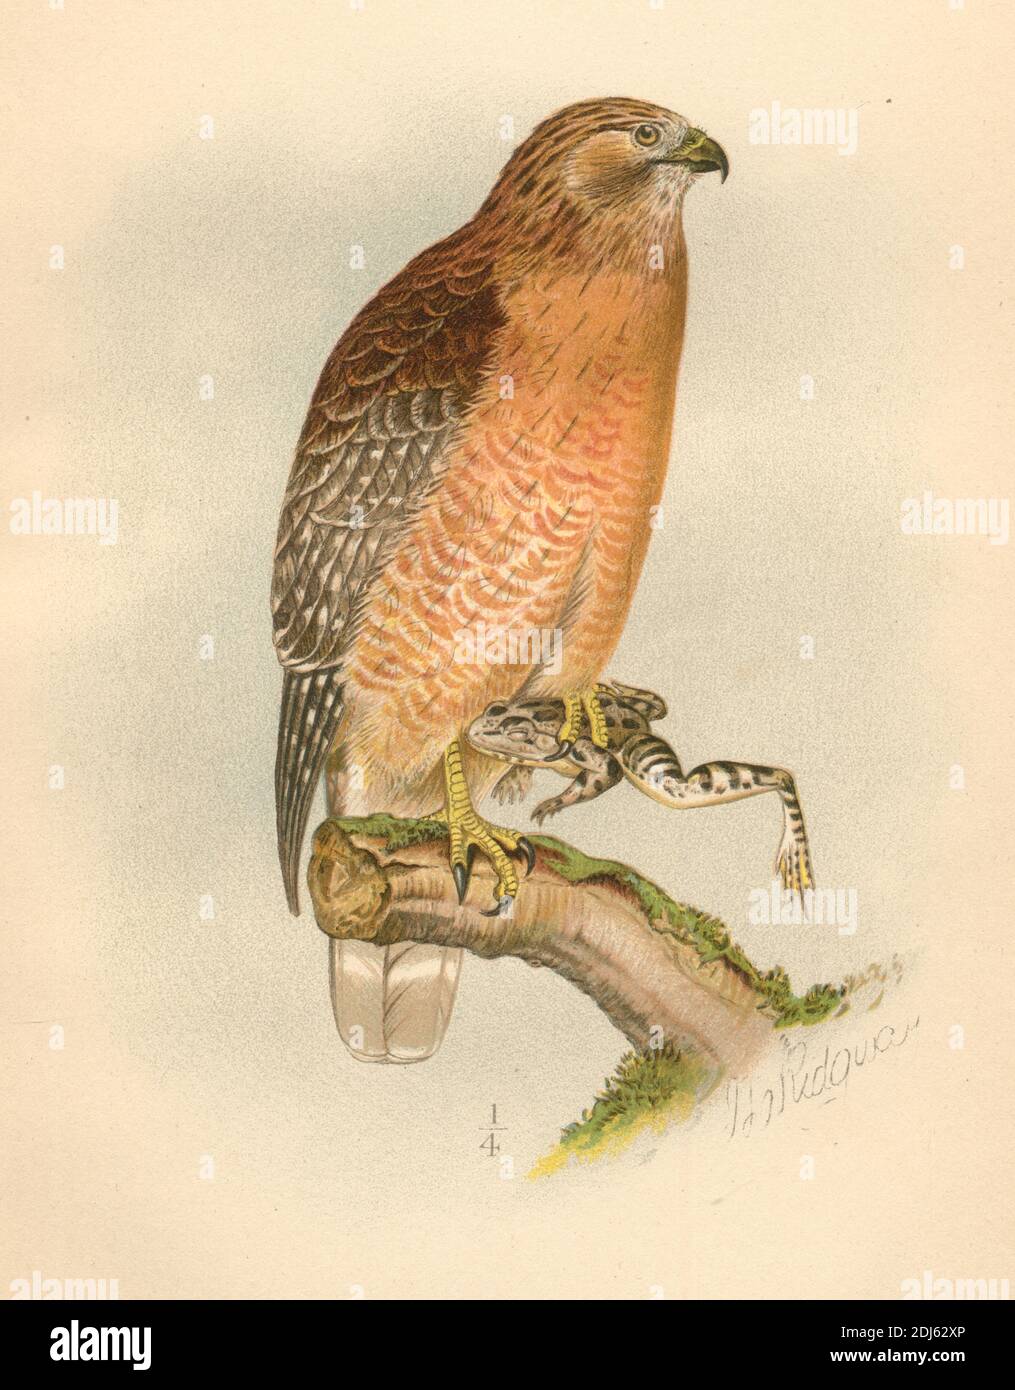 Plate 08, The Red-Shouldered Hawk - Chromolithographed plate from 1893 book 'The Hawks and Owls of the United States in Their Relation to Agriculture' Stock Photo